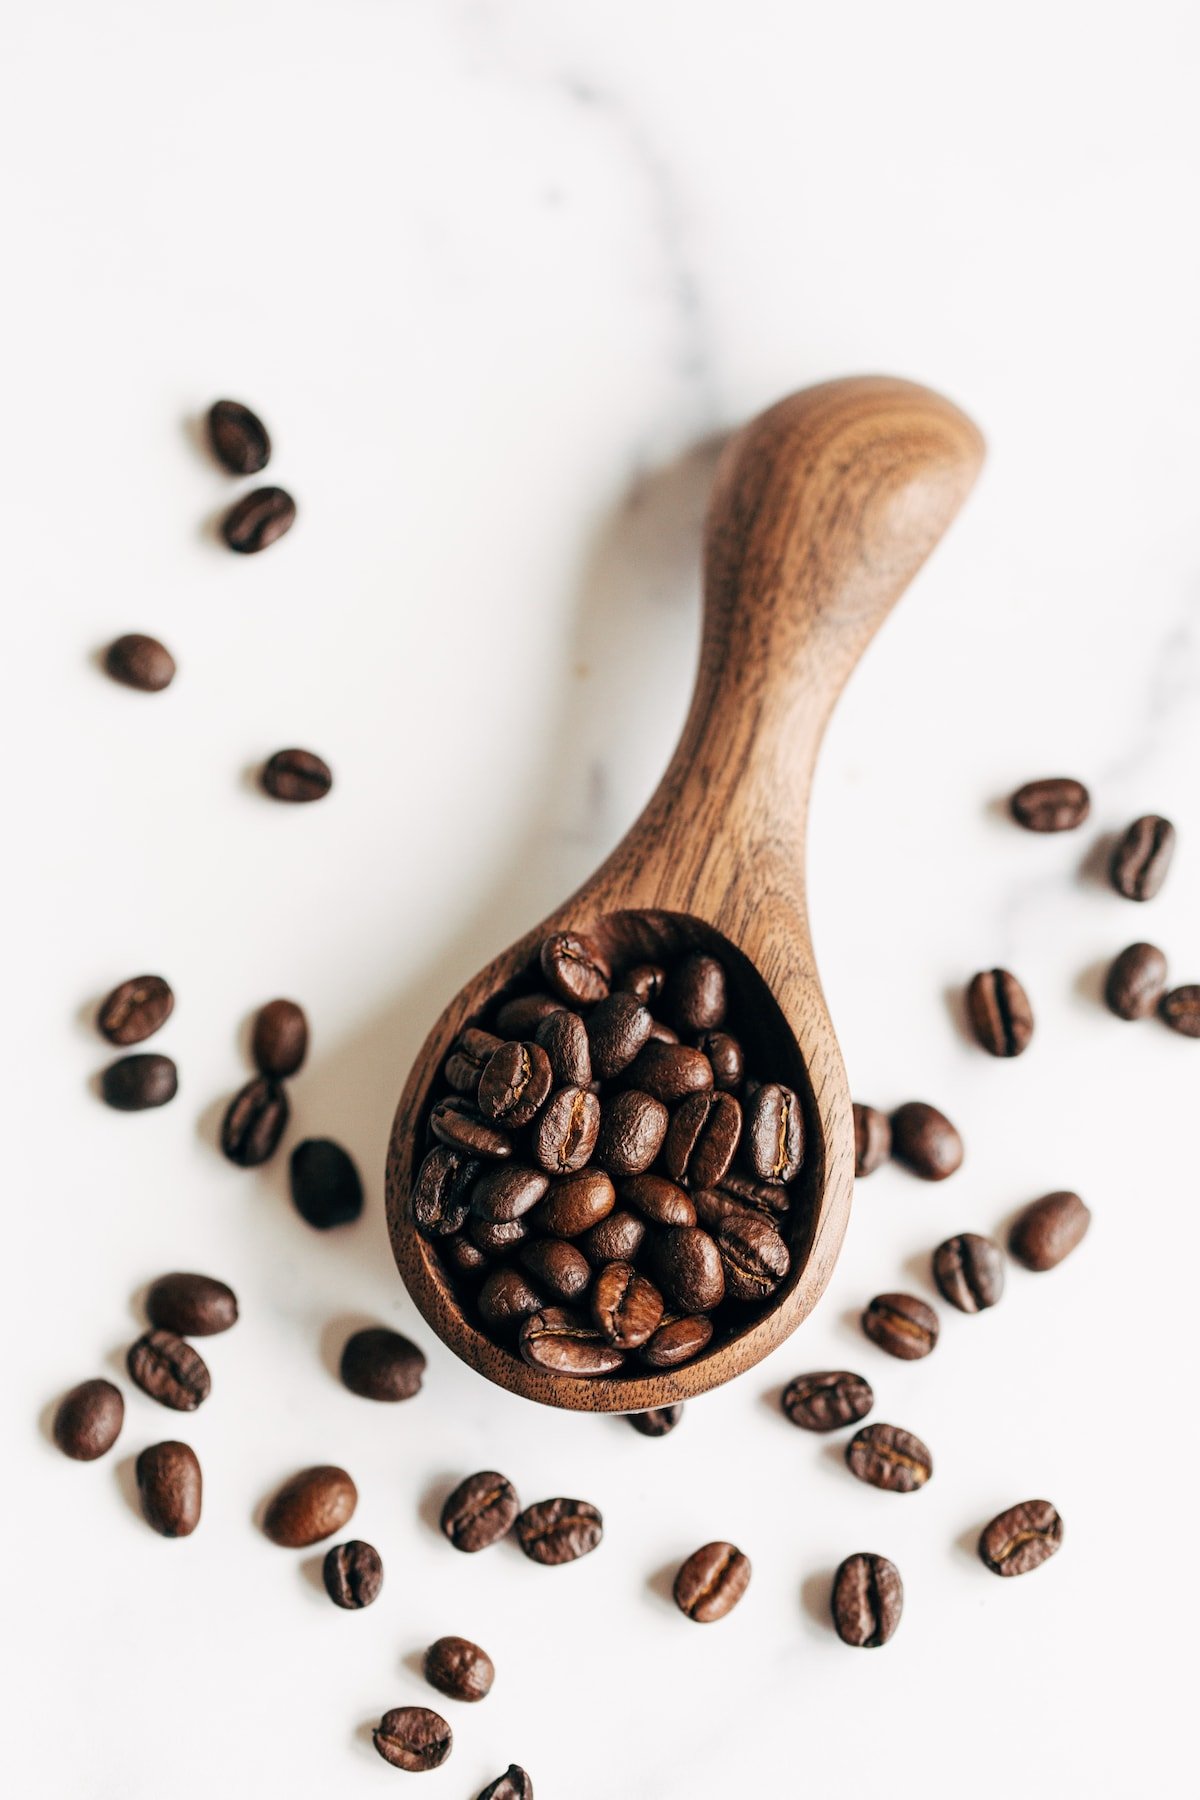 Wooden spoon with coffee beans.